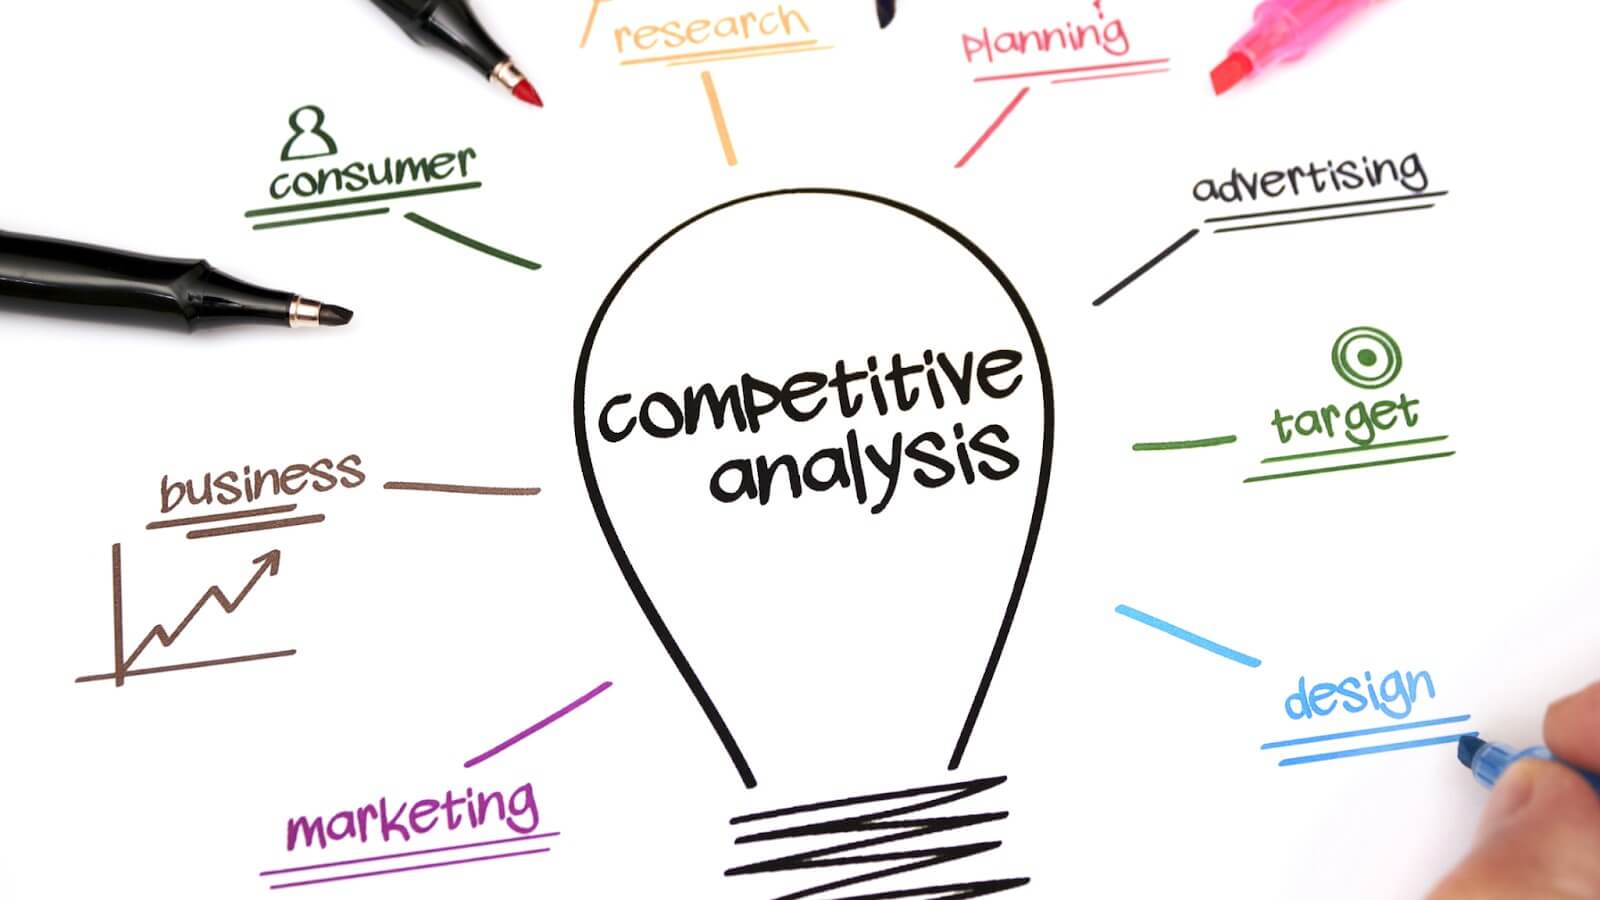 How to Do a Competitive Analysis in Digital Marketing